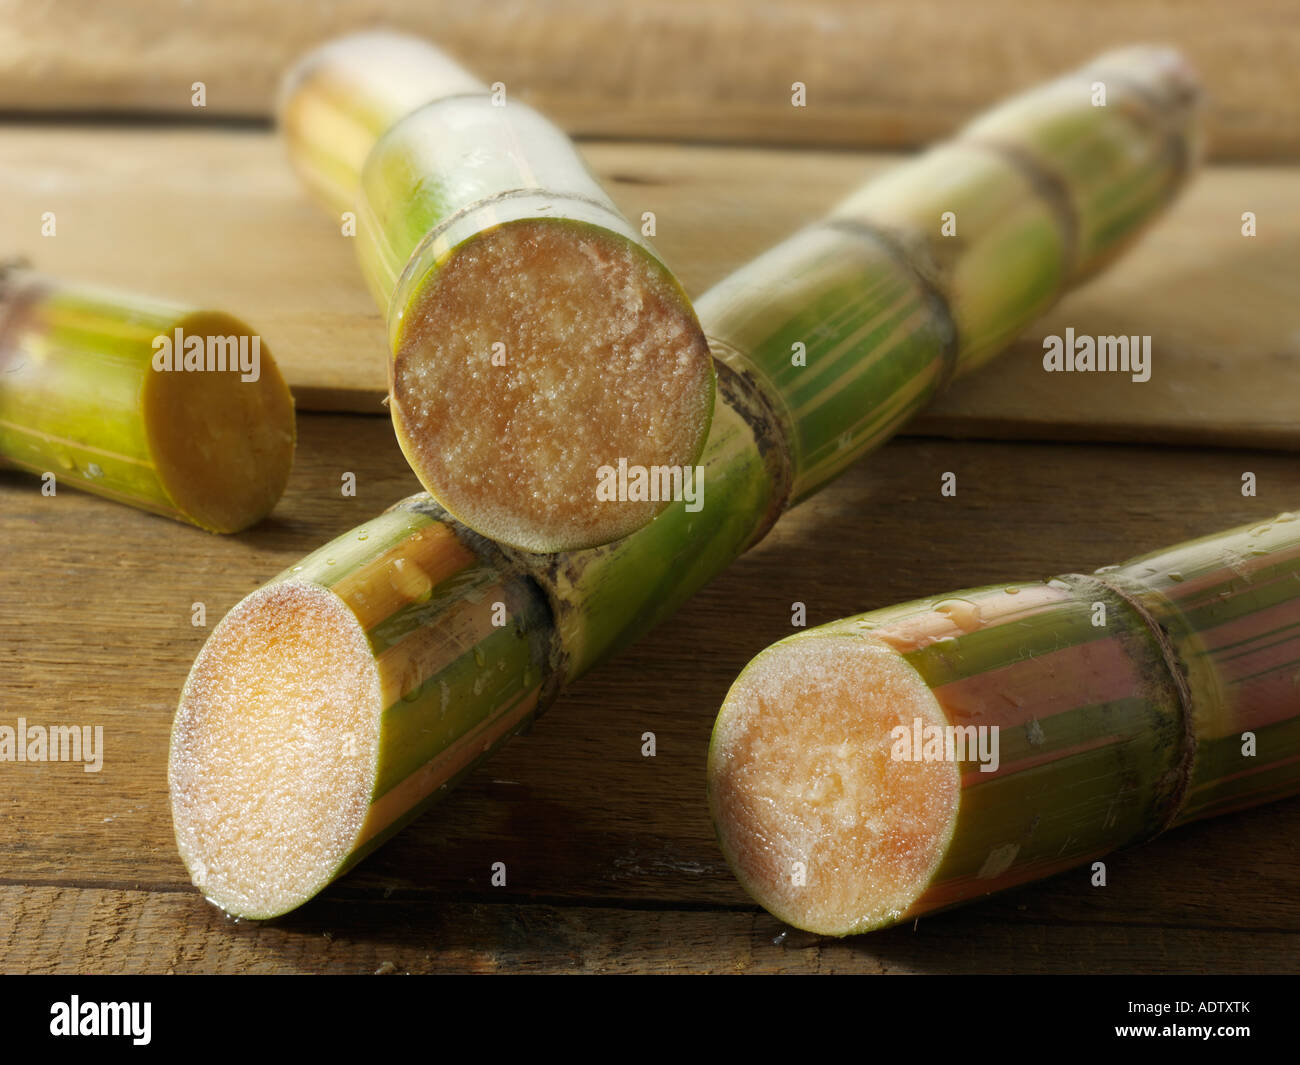 Raw sugar cane cut to show the inside Stock Photo